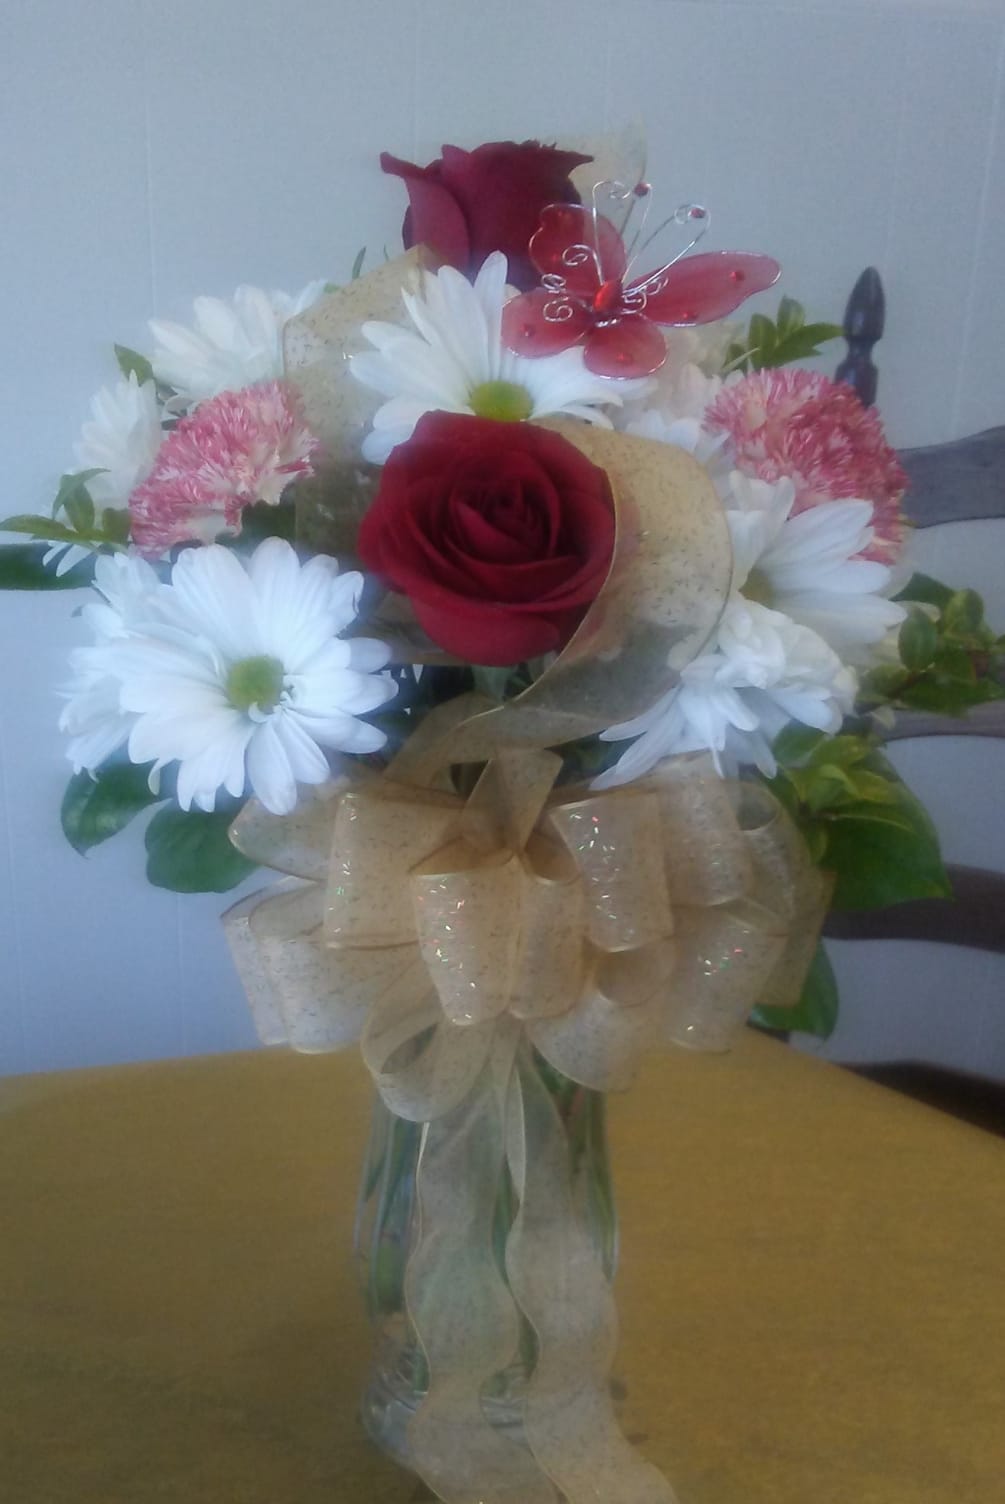 Red roses and daisies, elegant and casual, terrific for any year to